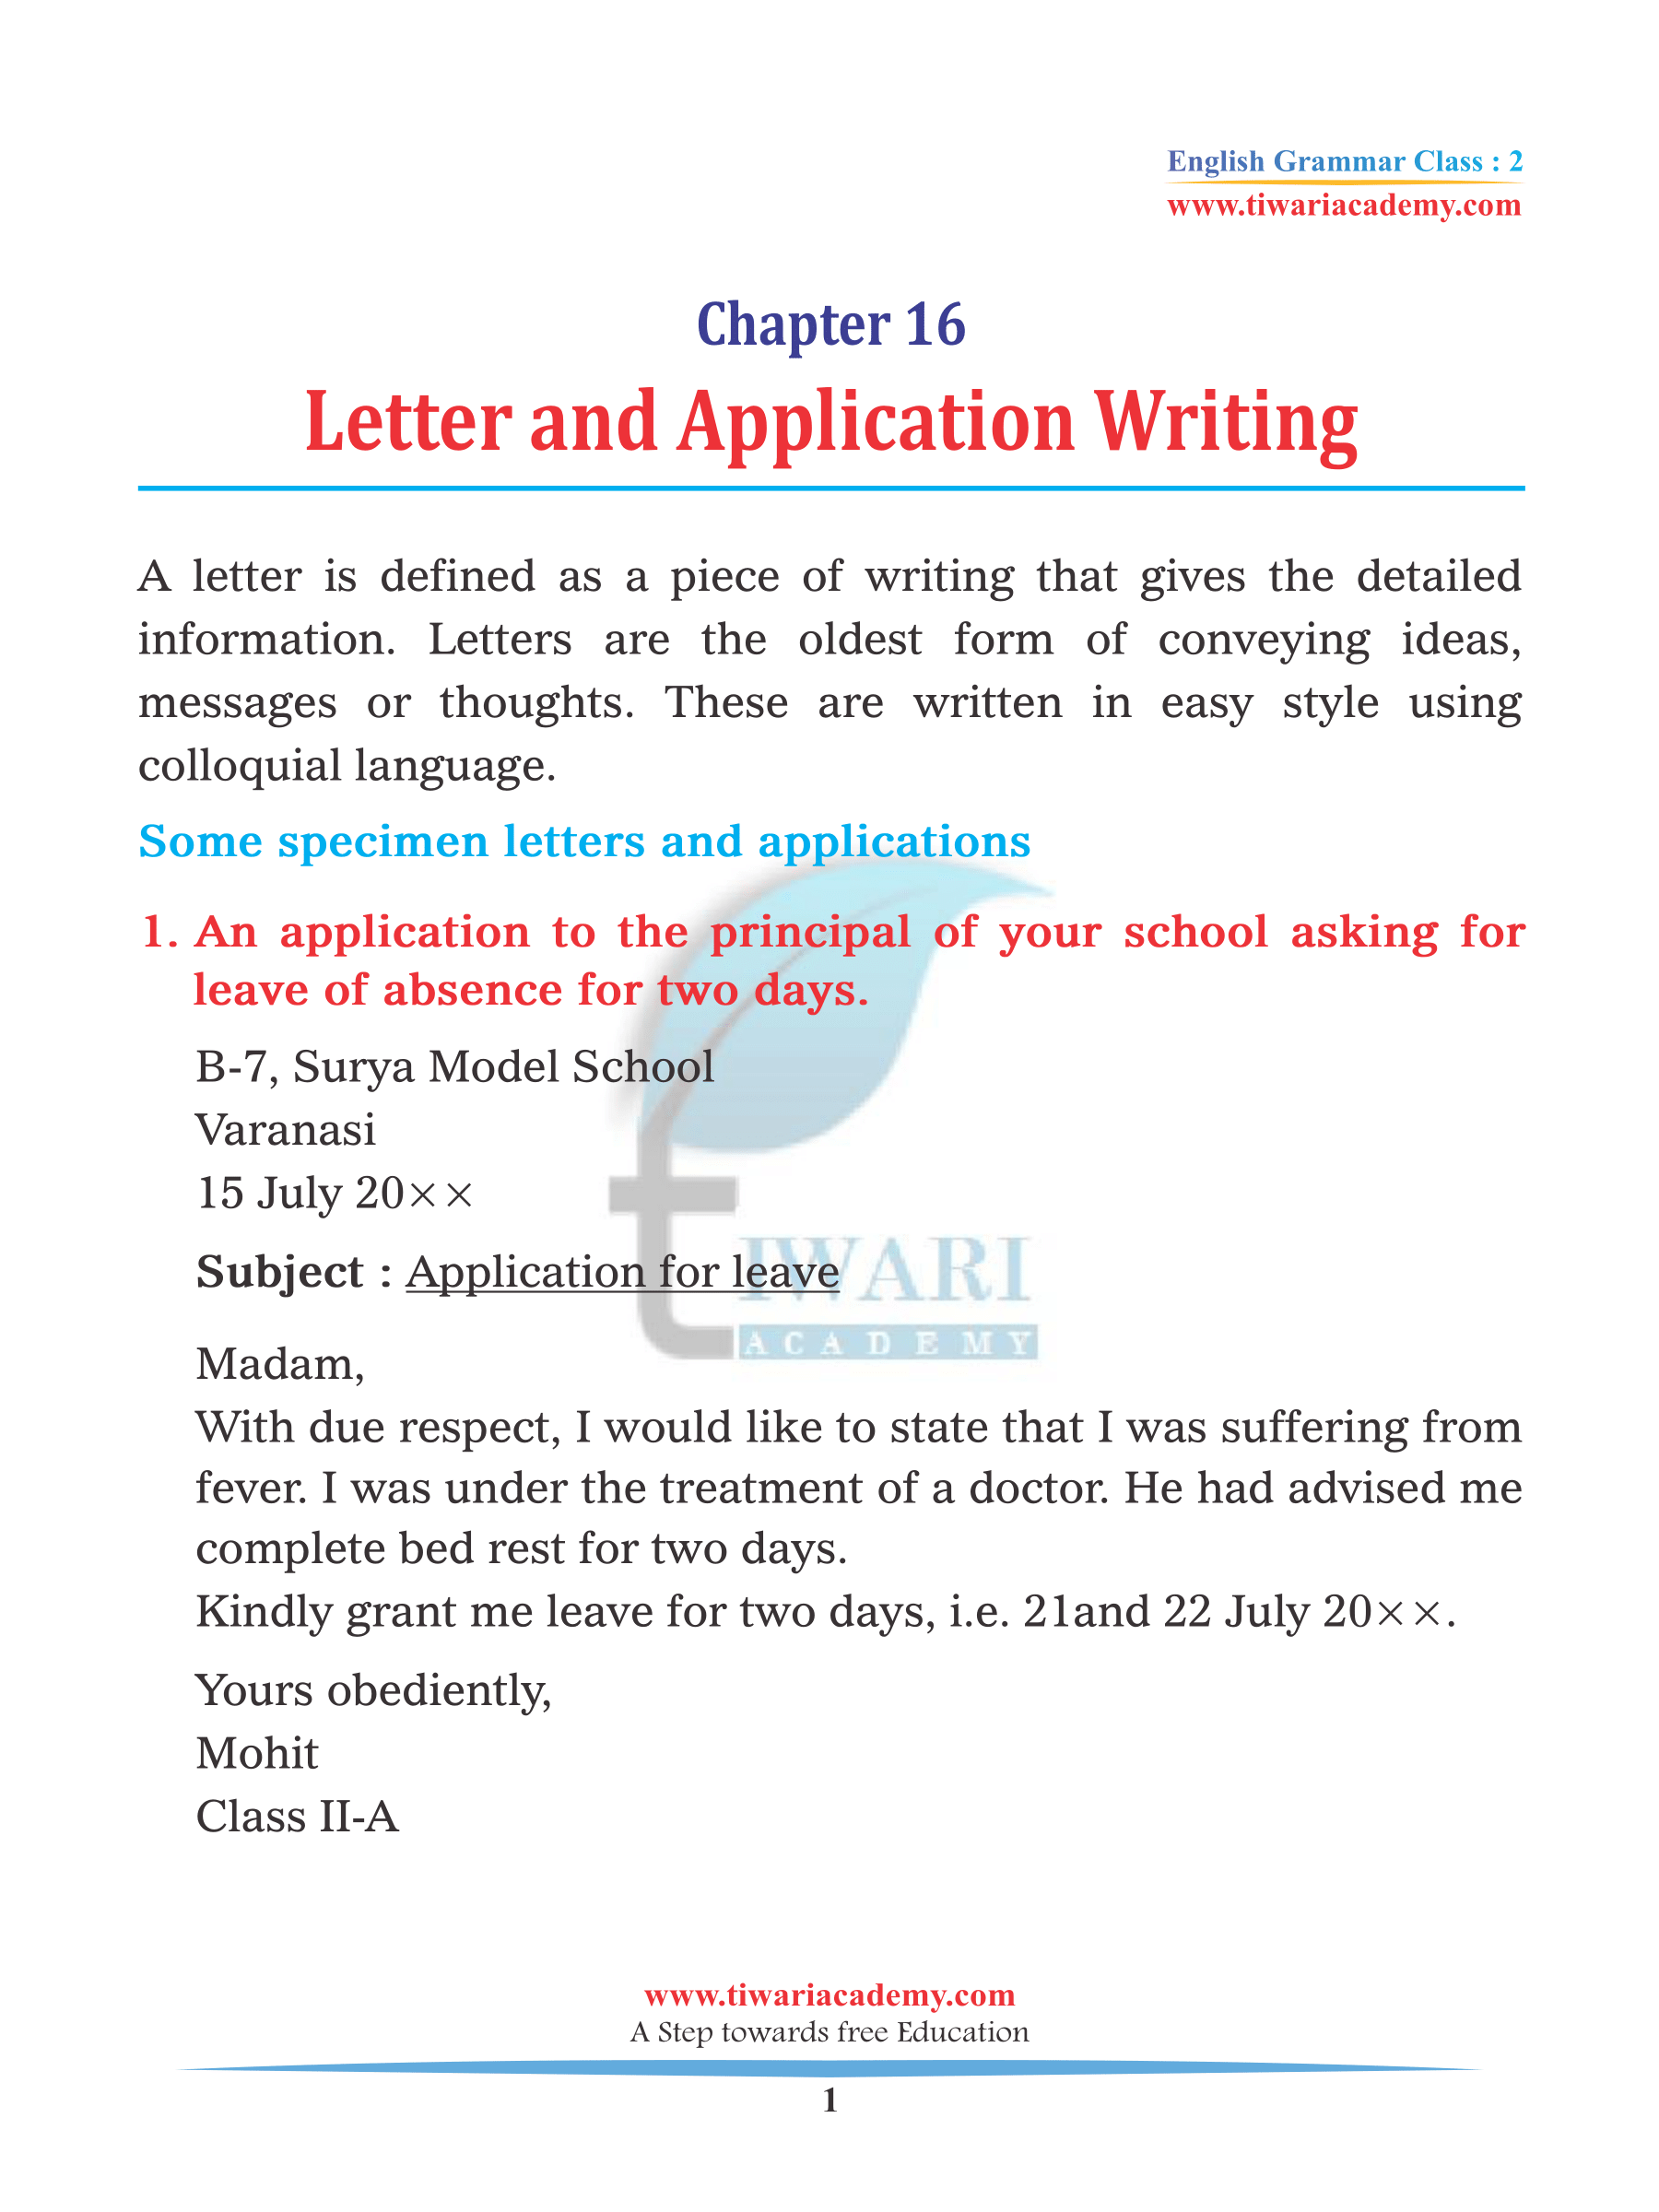 Class 2 English Grammar Chapter 16 Letter and Application assignments